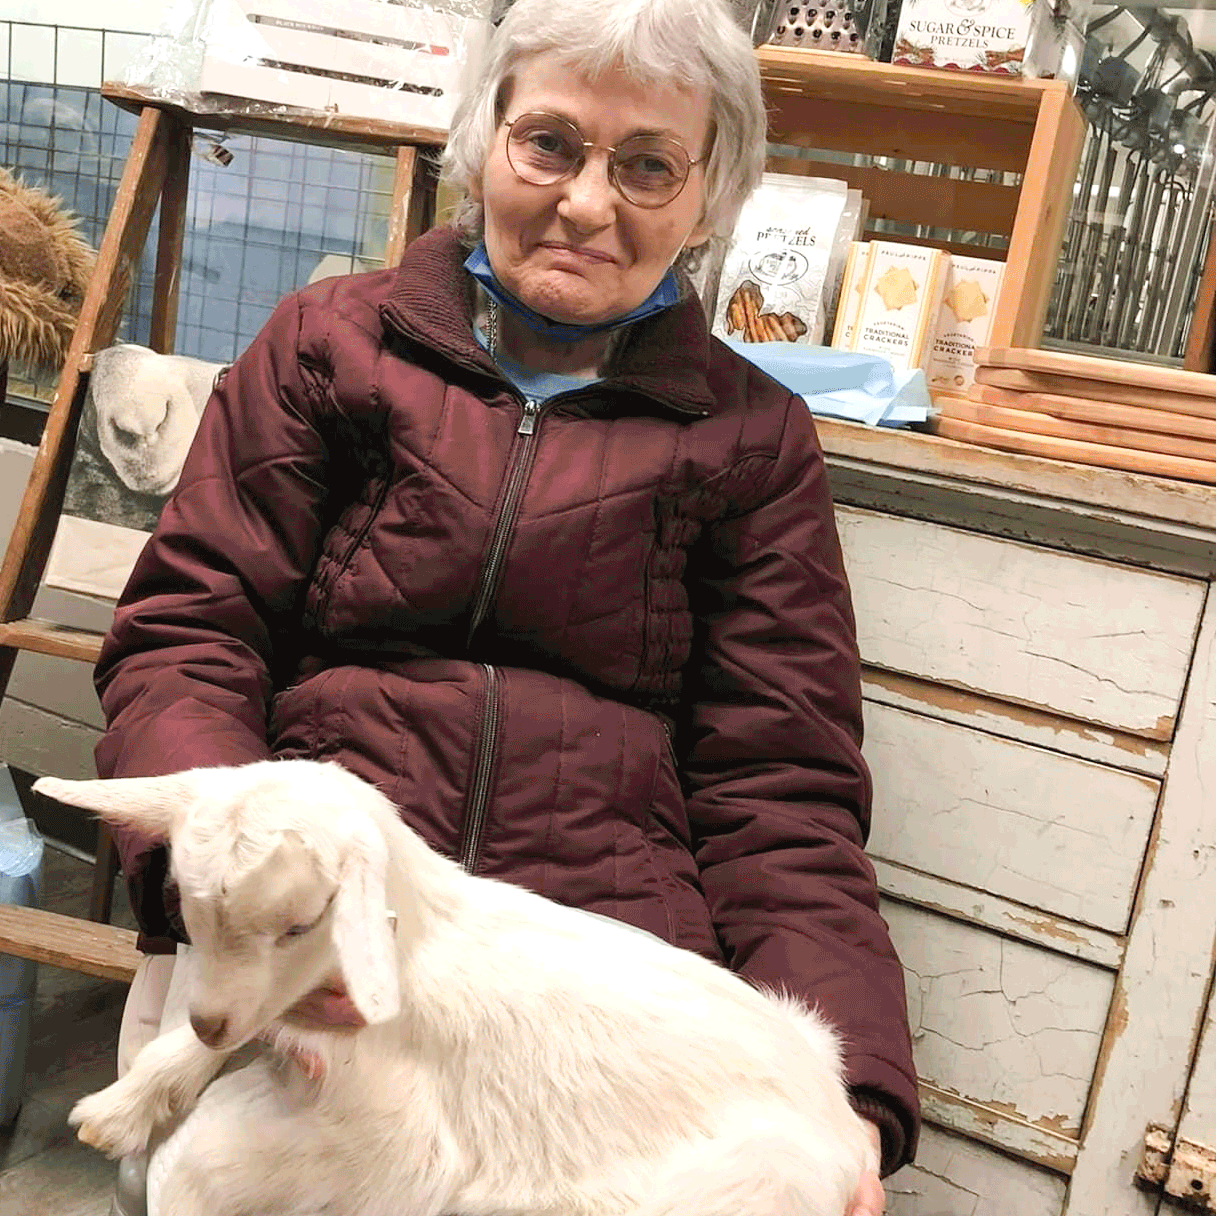 Goats being held by seniors slider